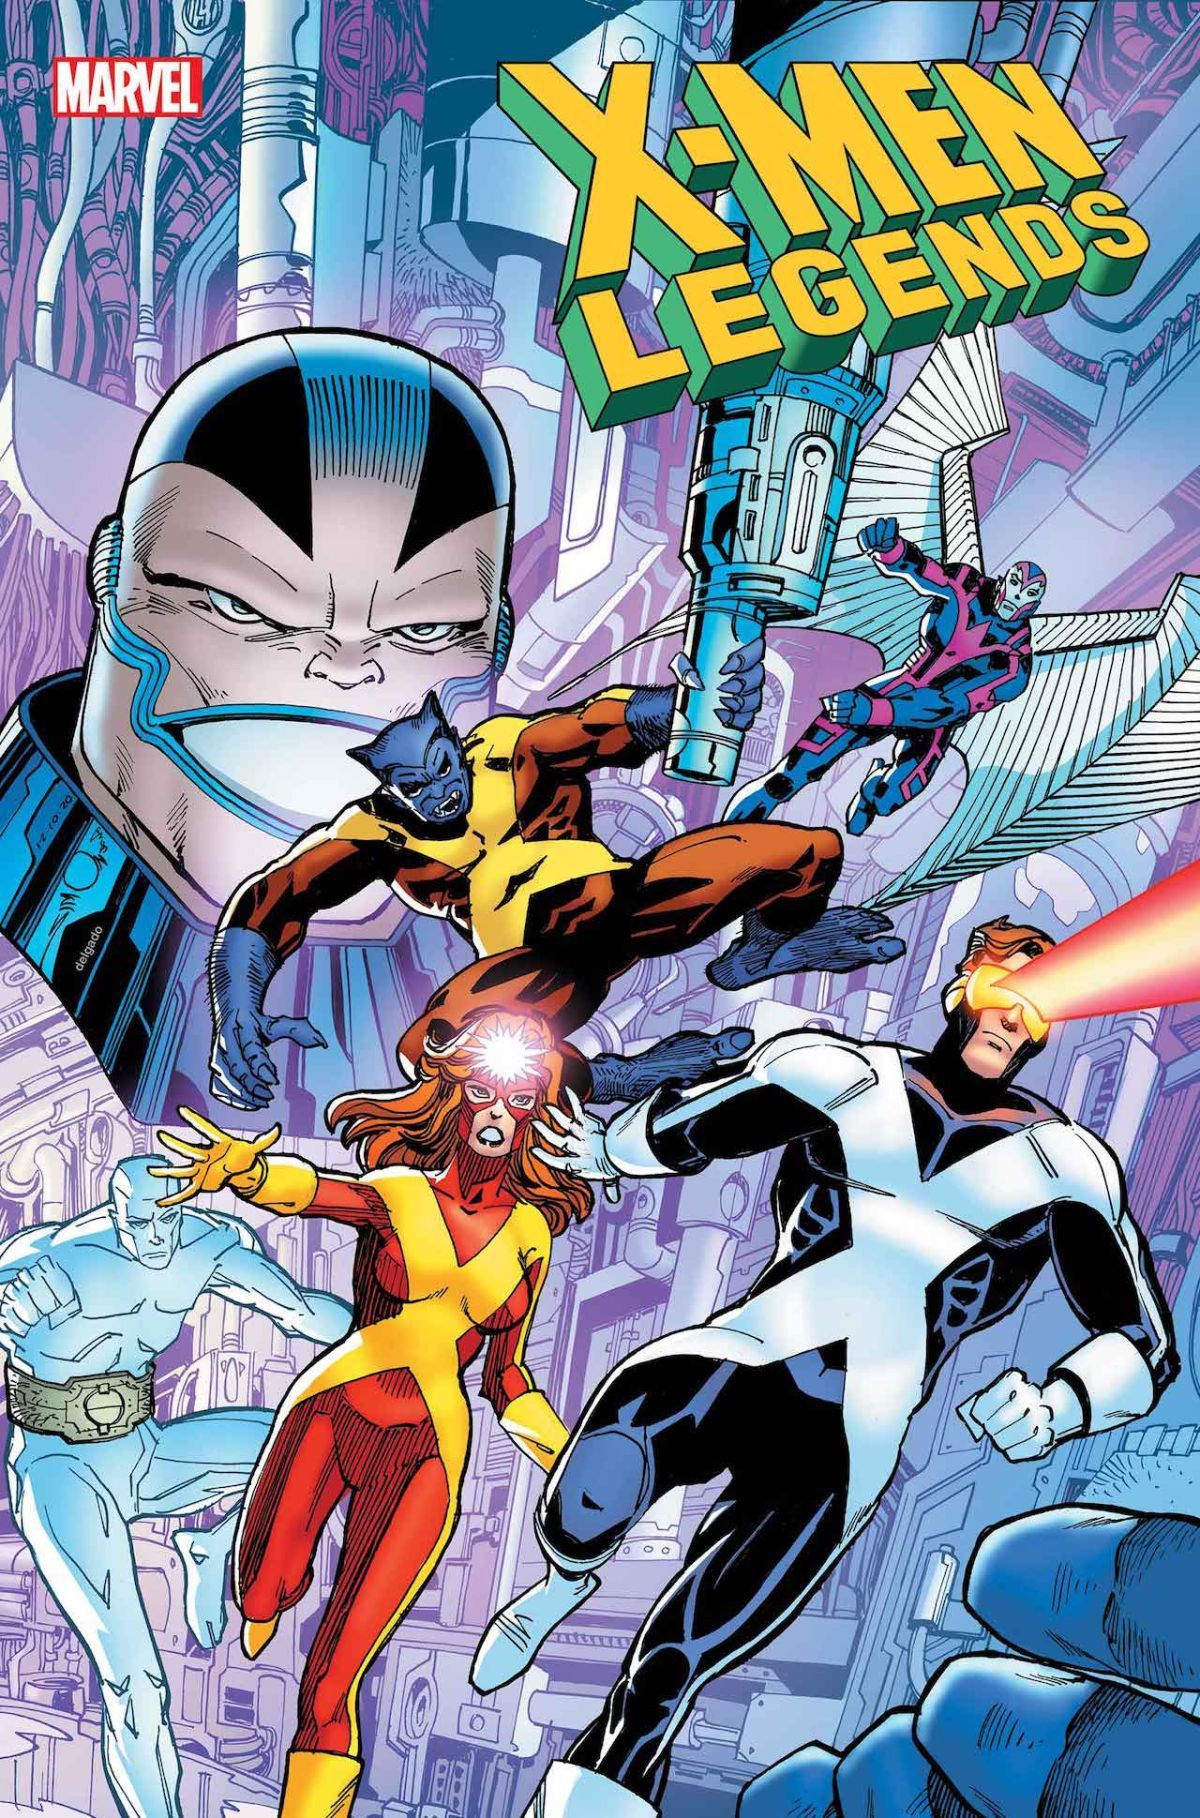 Louise and Walter Simonson Returning To X-Men in Legends Series